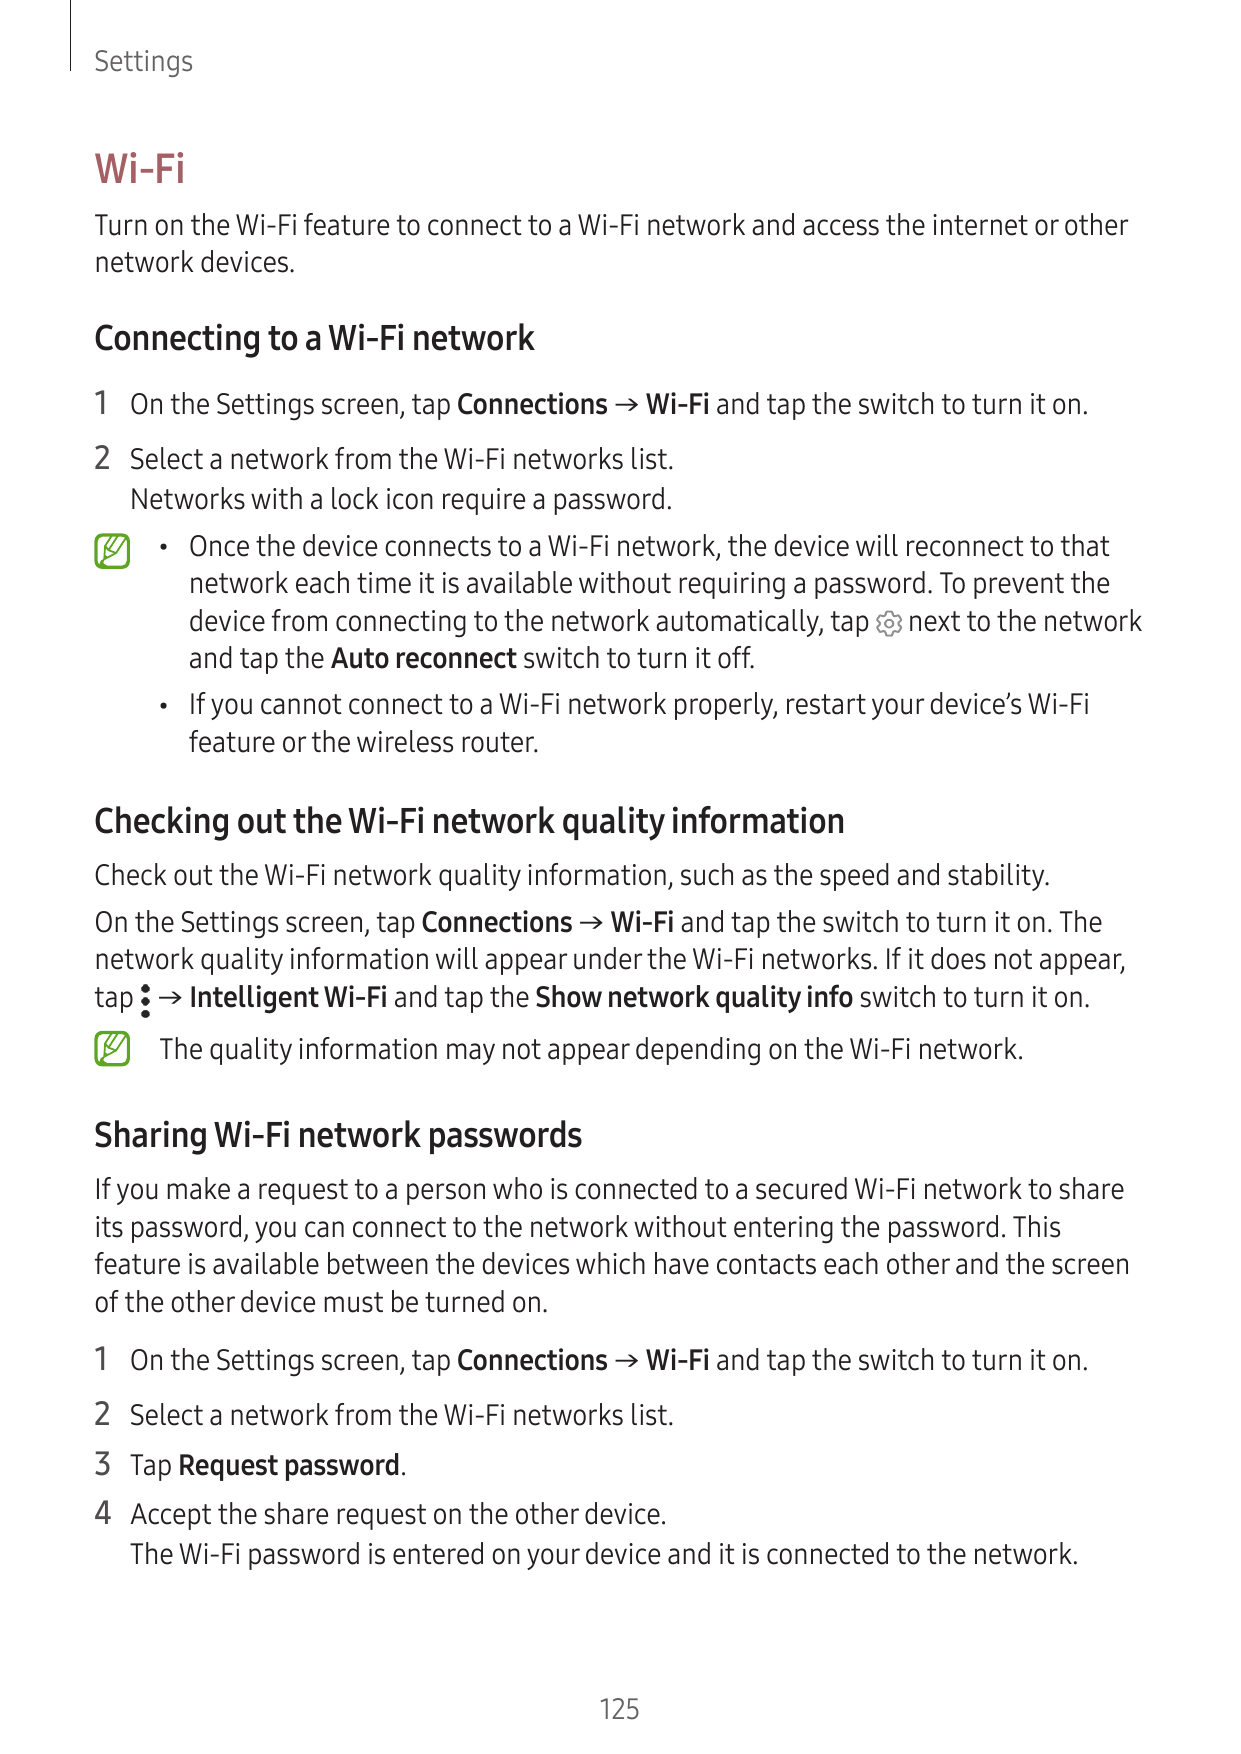 SettingsWi-FiTurn on the Wi-Fi feature to connect to a Wi-Fi network and access the internet or othernetwork devices.Connecting 